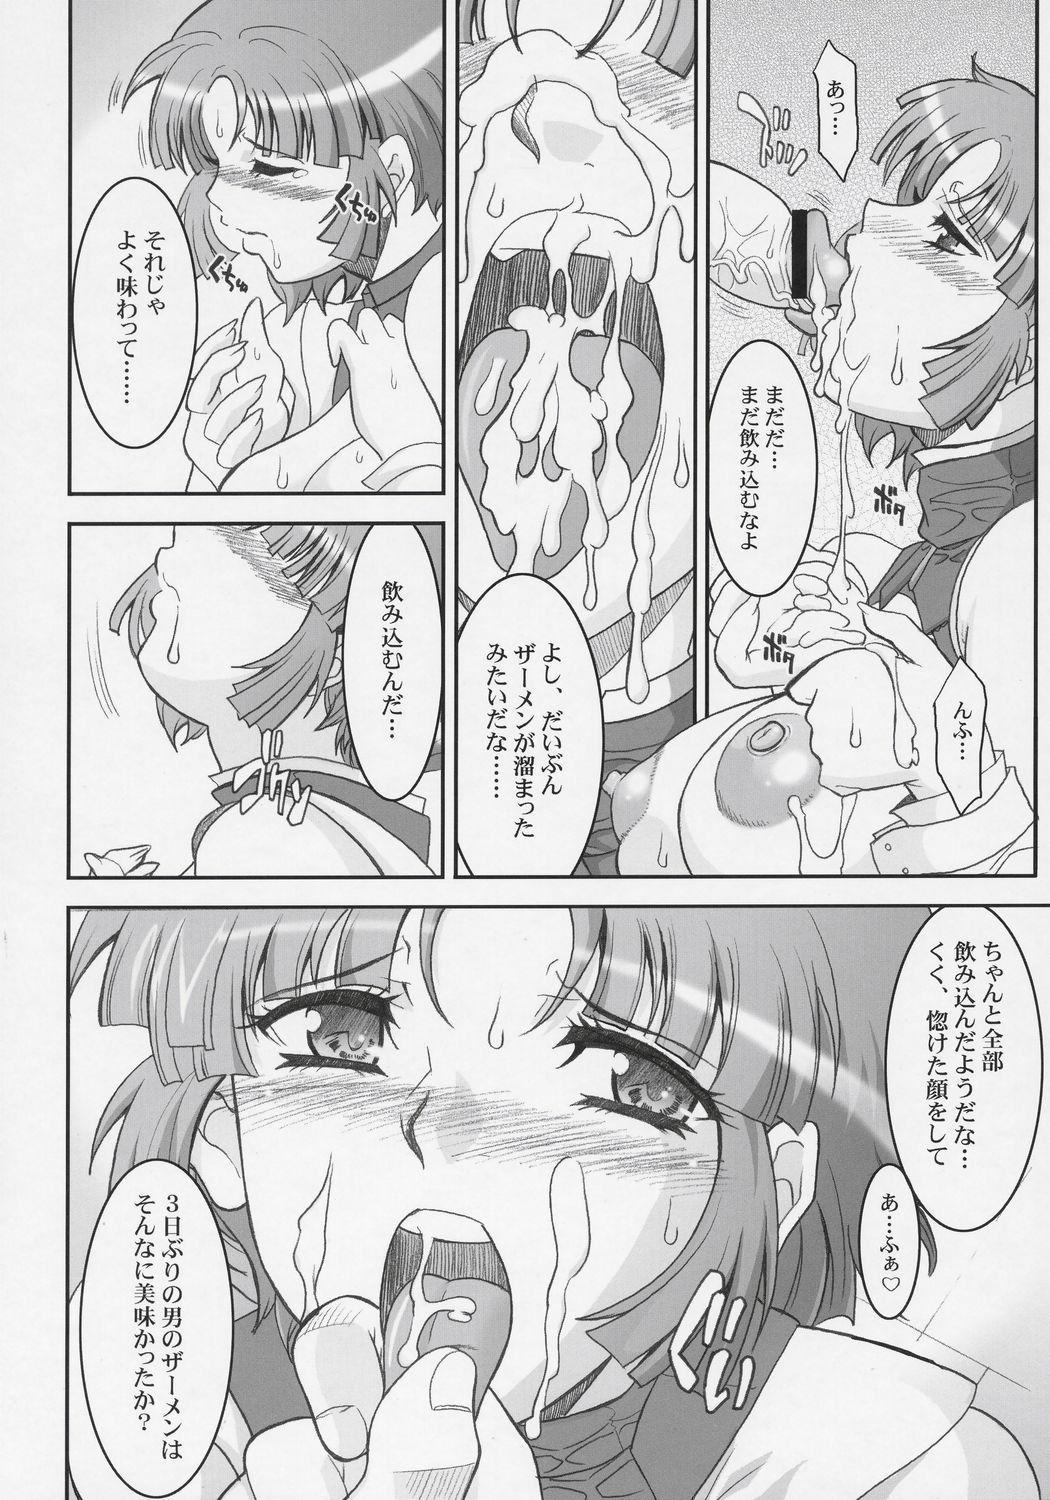 Pussy Lick STEEL HEROINES Vol. 1 - Super robot wars Stroking - Page 11